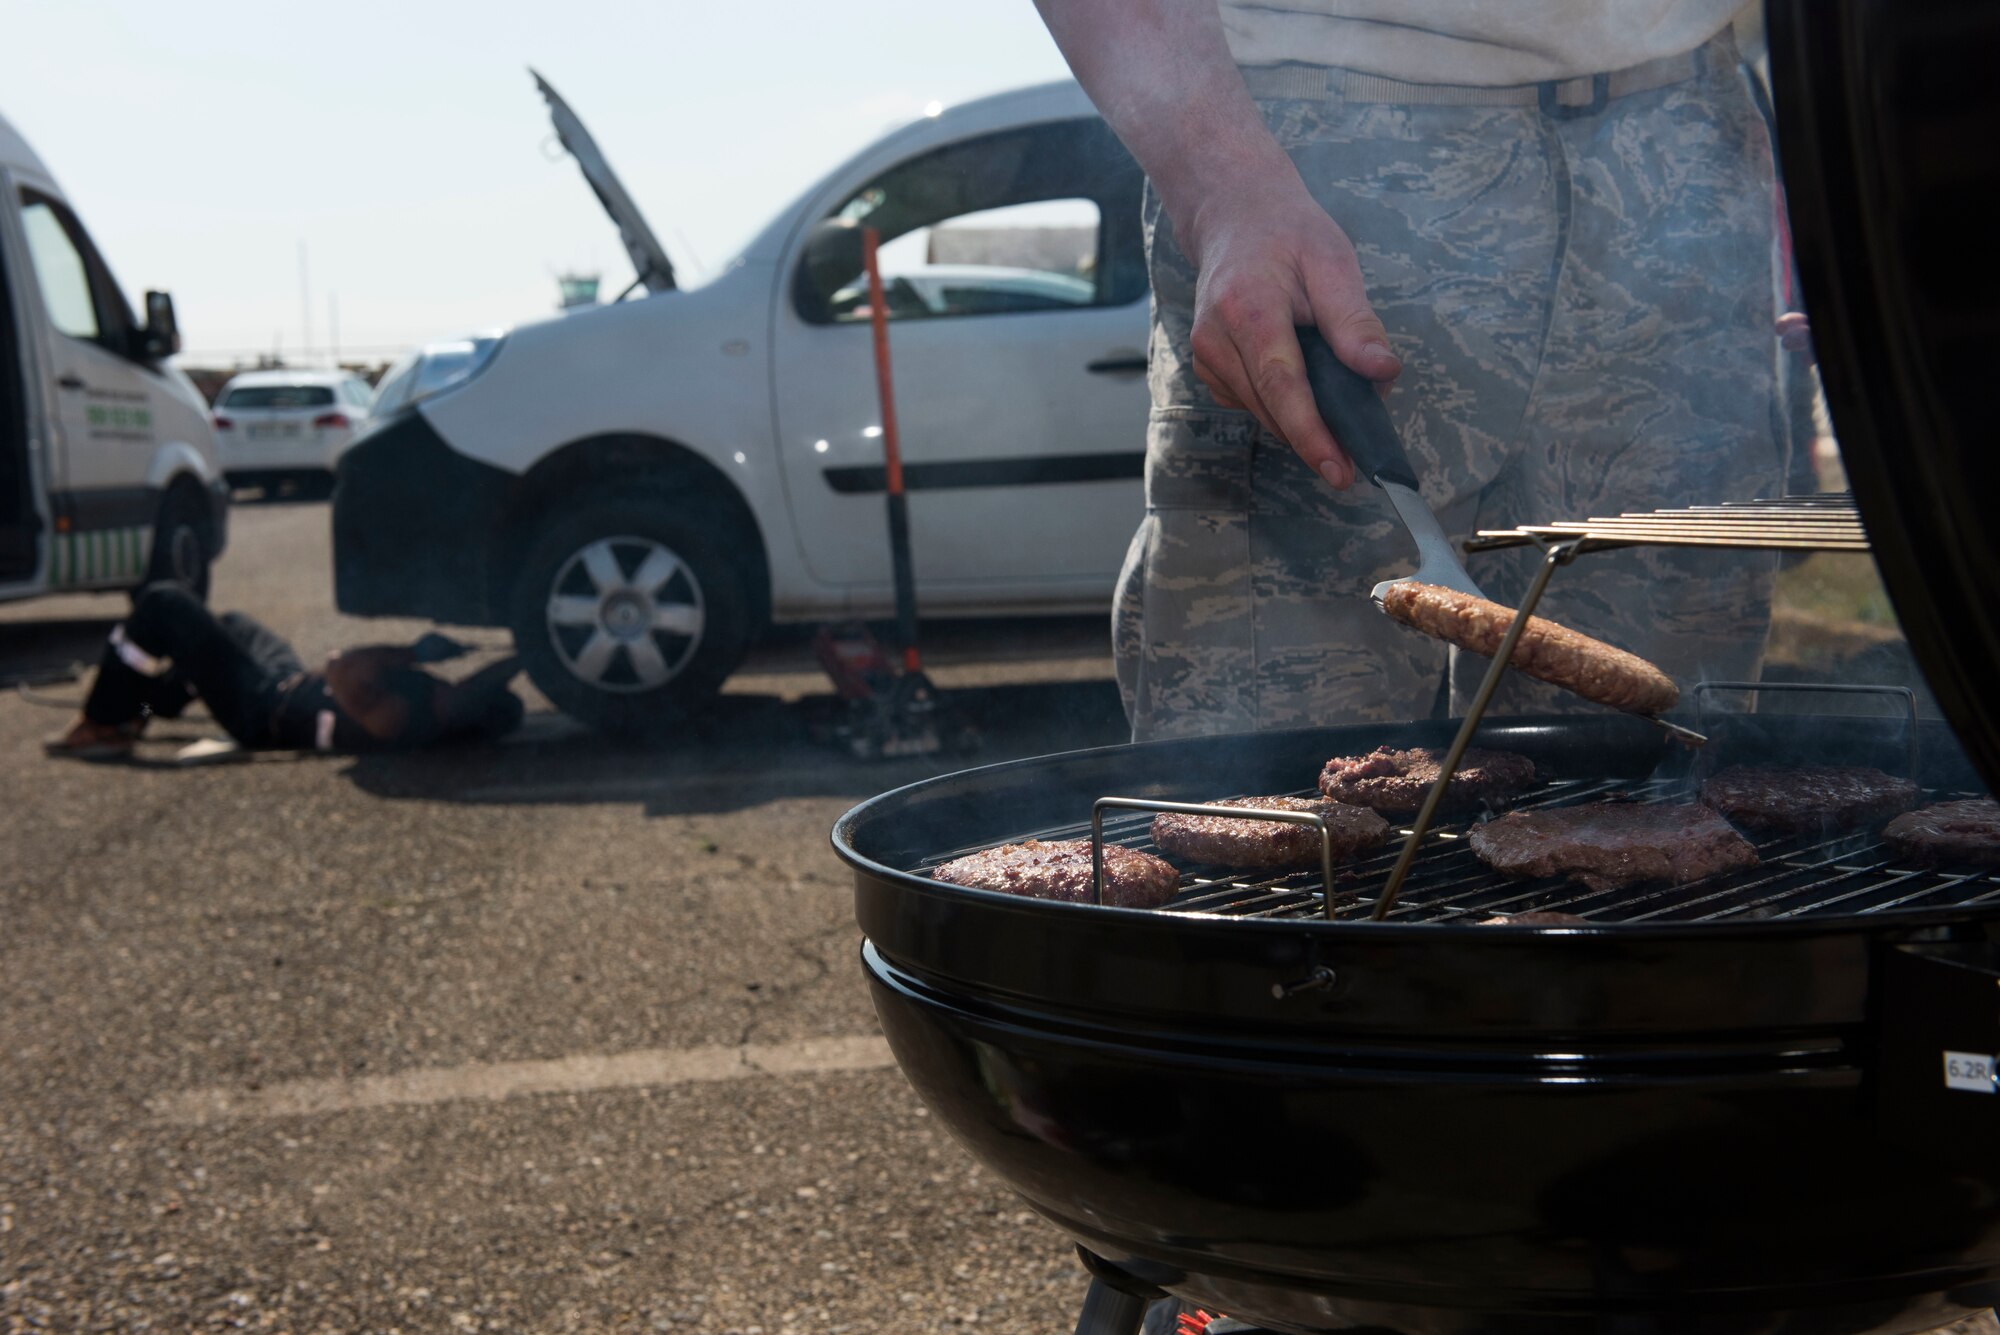 A U.S. Air Force Airman deployed to the 351st Expeditionary Air Refueling Squadron barbeques during a resiliency event at Zaragoza, Spain, May 24, 2018. Team Mildenhall’s community support coordinator established the 100th Aircraft Maintenance Squadron deployed resiliency training for Airmen in the deployed environment. (U.S. Air Force photo by Airman 1st Class Alexandria Lee)